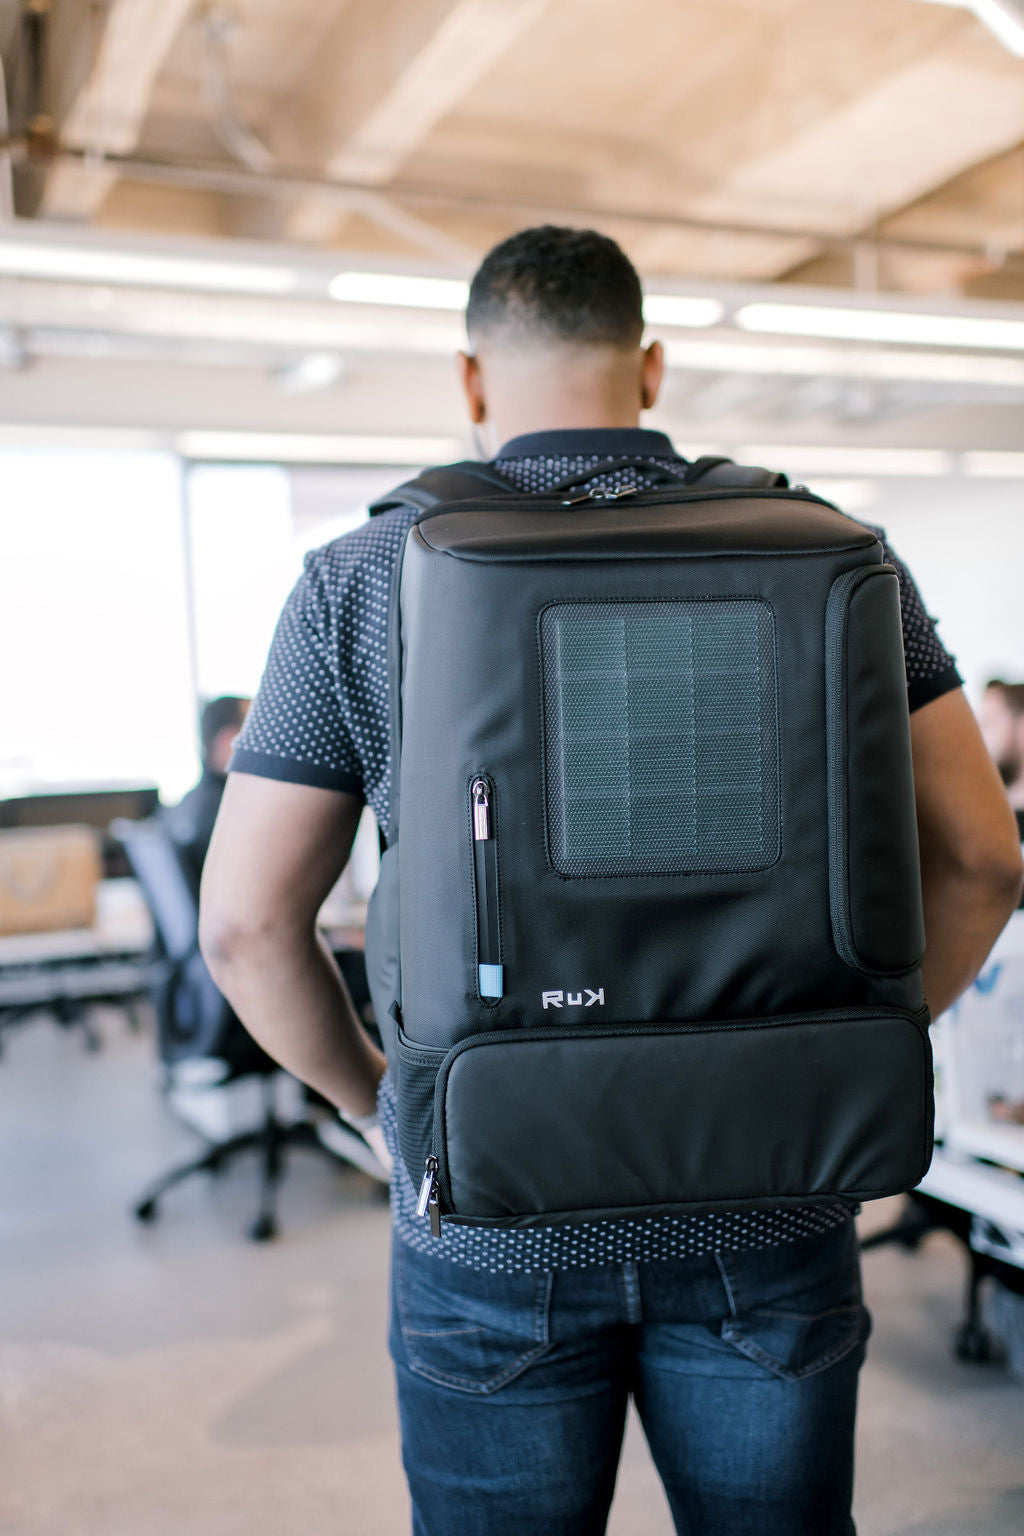 Why it's Important to Invest in a Quality Backpack